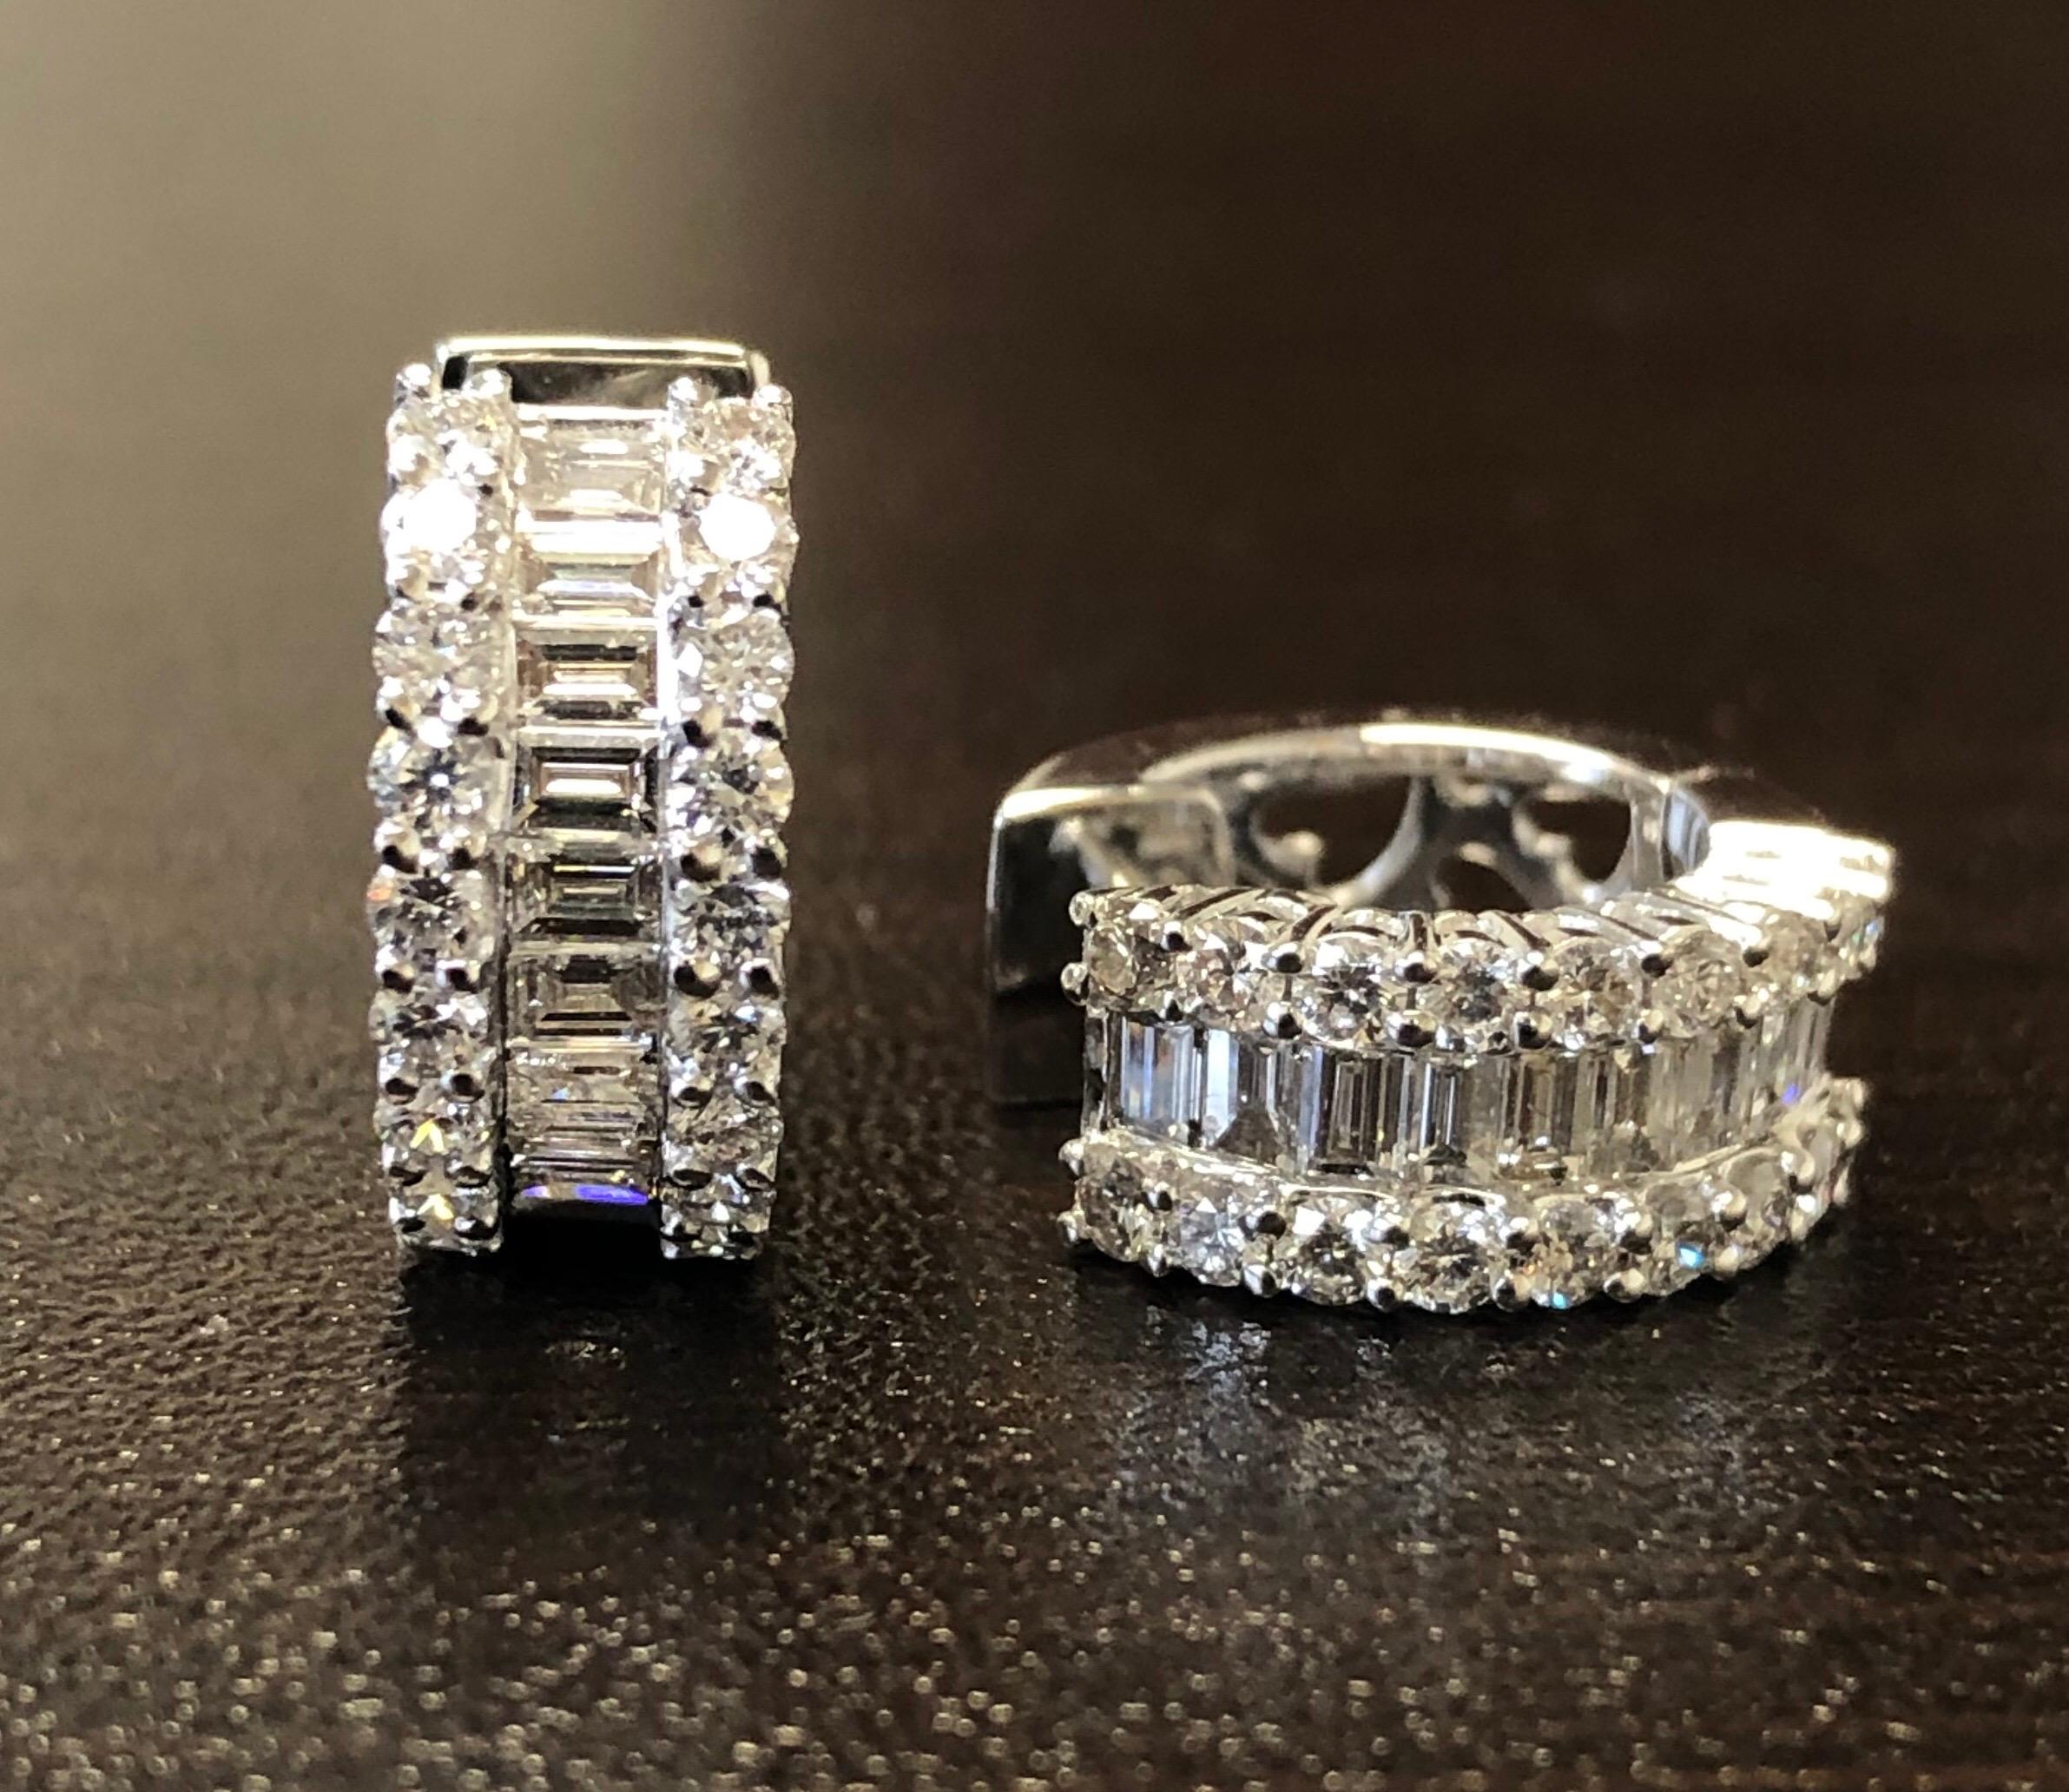 Diamond Huggies set in 18K white gold. The diamonds are set halfway on the outside with baguette stones in the middle and 2 rows of round diamonds. The stones are F color, VS1-VS2 clarity. The total carat weight is 1.74, the carat weight of round